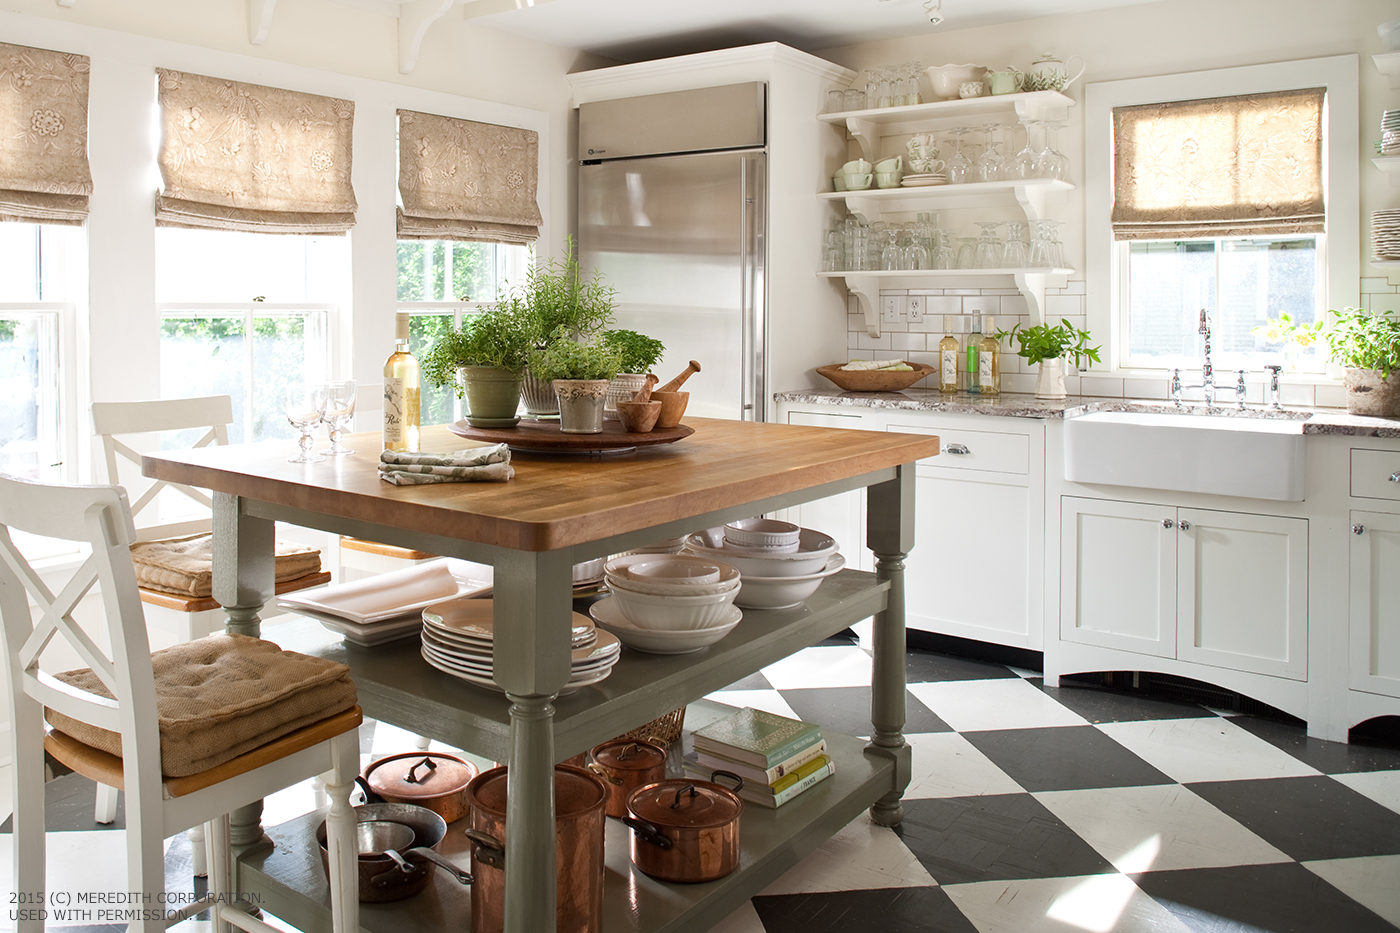 Stylish Kitchen Floor Ideas for Your Home Renovation - bhgrelife.com